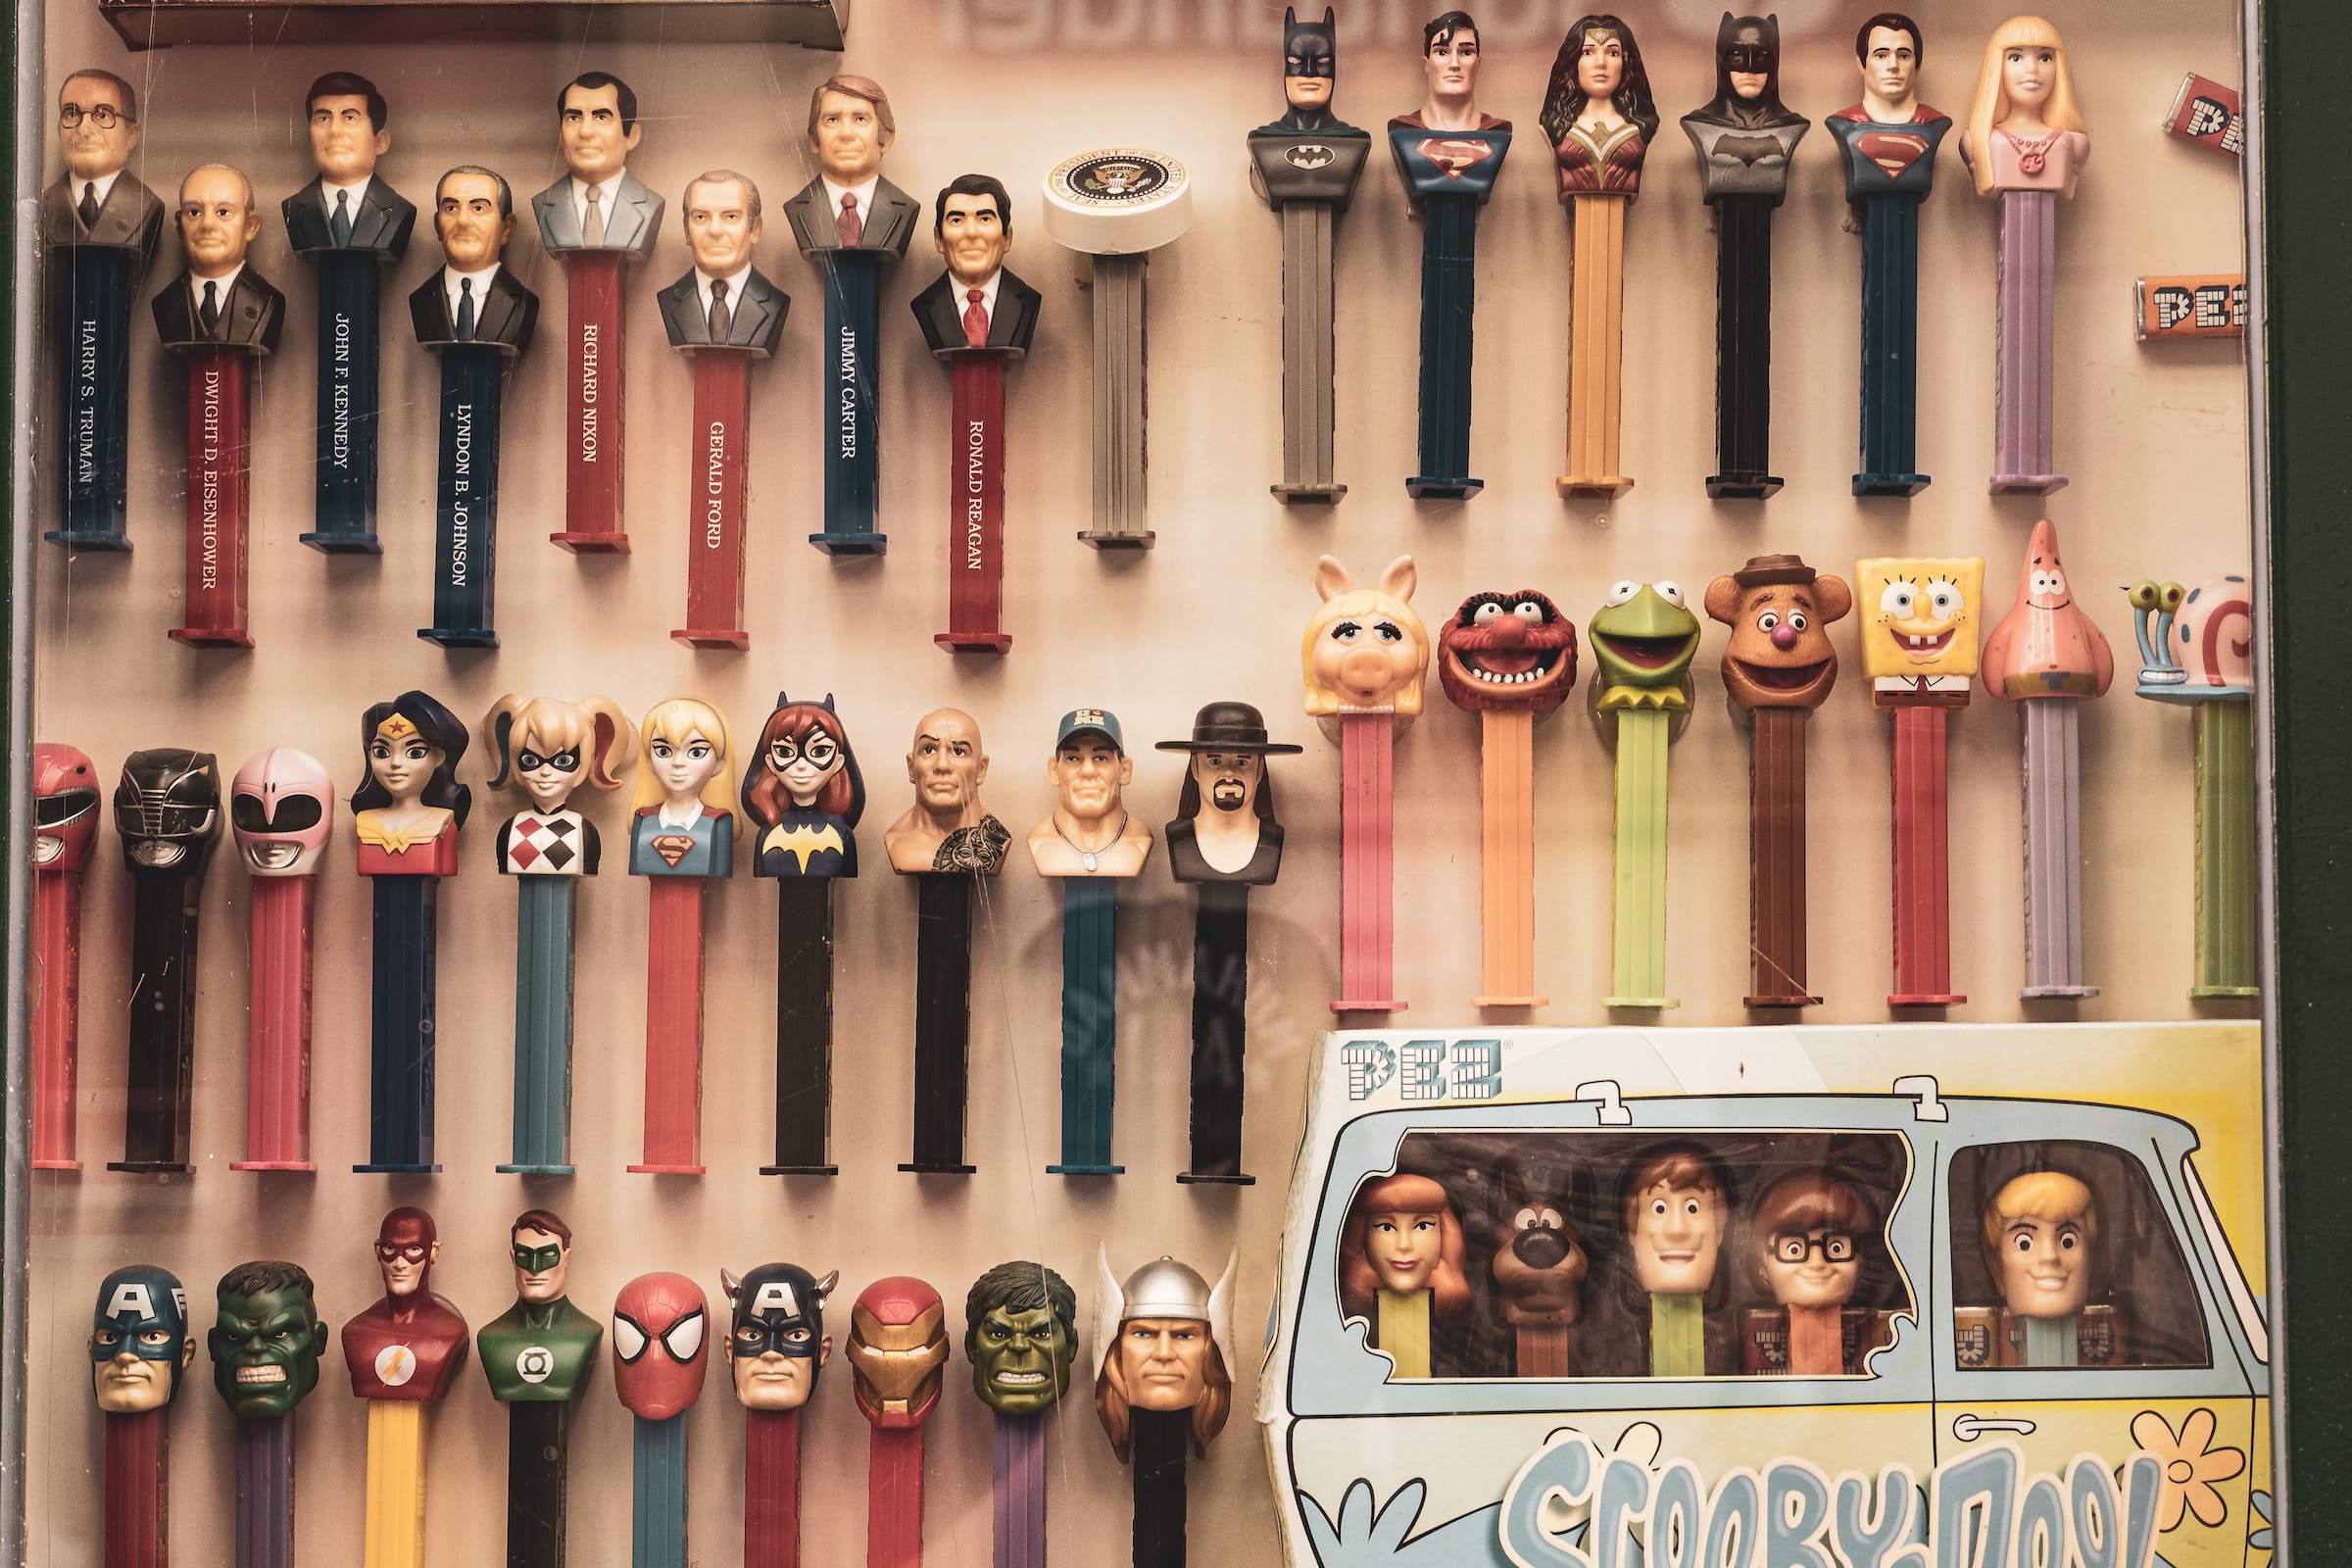 Most Expensive PEZ Dispensers for Sale